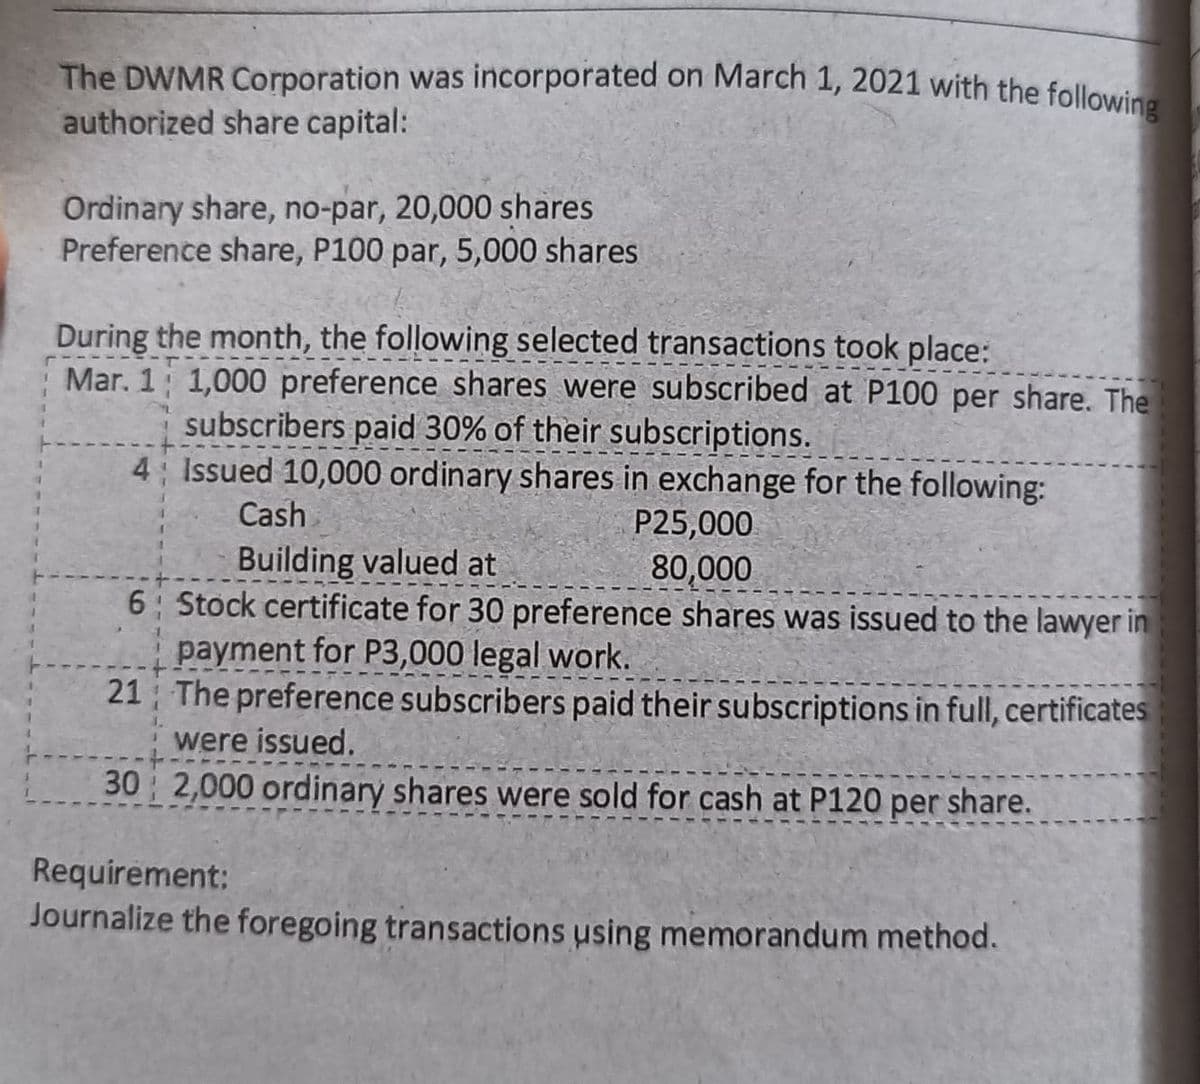 The DWMR Corporation was incorporated on March 1, 2021 with the followine
authorized share capital:
Ordinary share, no-par, 20,000 shares
Preference share, P100 par, 5,000 shares
During the month, the following selected transactions took place:
Mar. 1 1,000 preference shares were subscribed at P100 per share. The
subscribers paid 30% of their subscriptions.
4 Issued 10,000 ordinary shares in exchange for the following:
Cash
P25,000
Building valued at
6 Stock certificate for 30 preference shares was issued to the lawyer in
payment for P3,000 legal work.
21 The preference subscribers paid their subscriptions in full, certificates
were issued.
30 2,000 ordinary shares were sold for cash at P120 per share.
80,000
Requirement:
Journalize the foregoing transactions using memorandum method.
